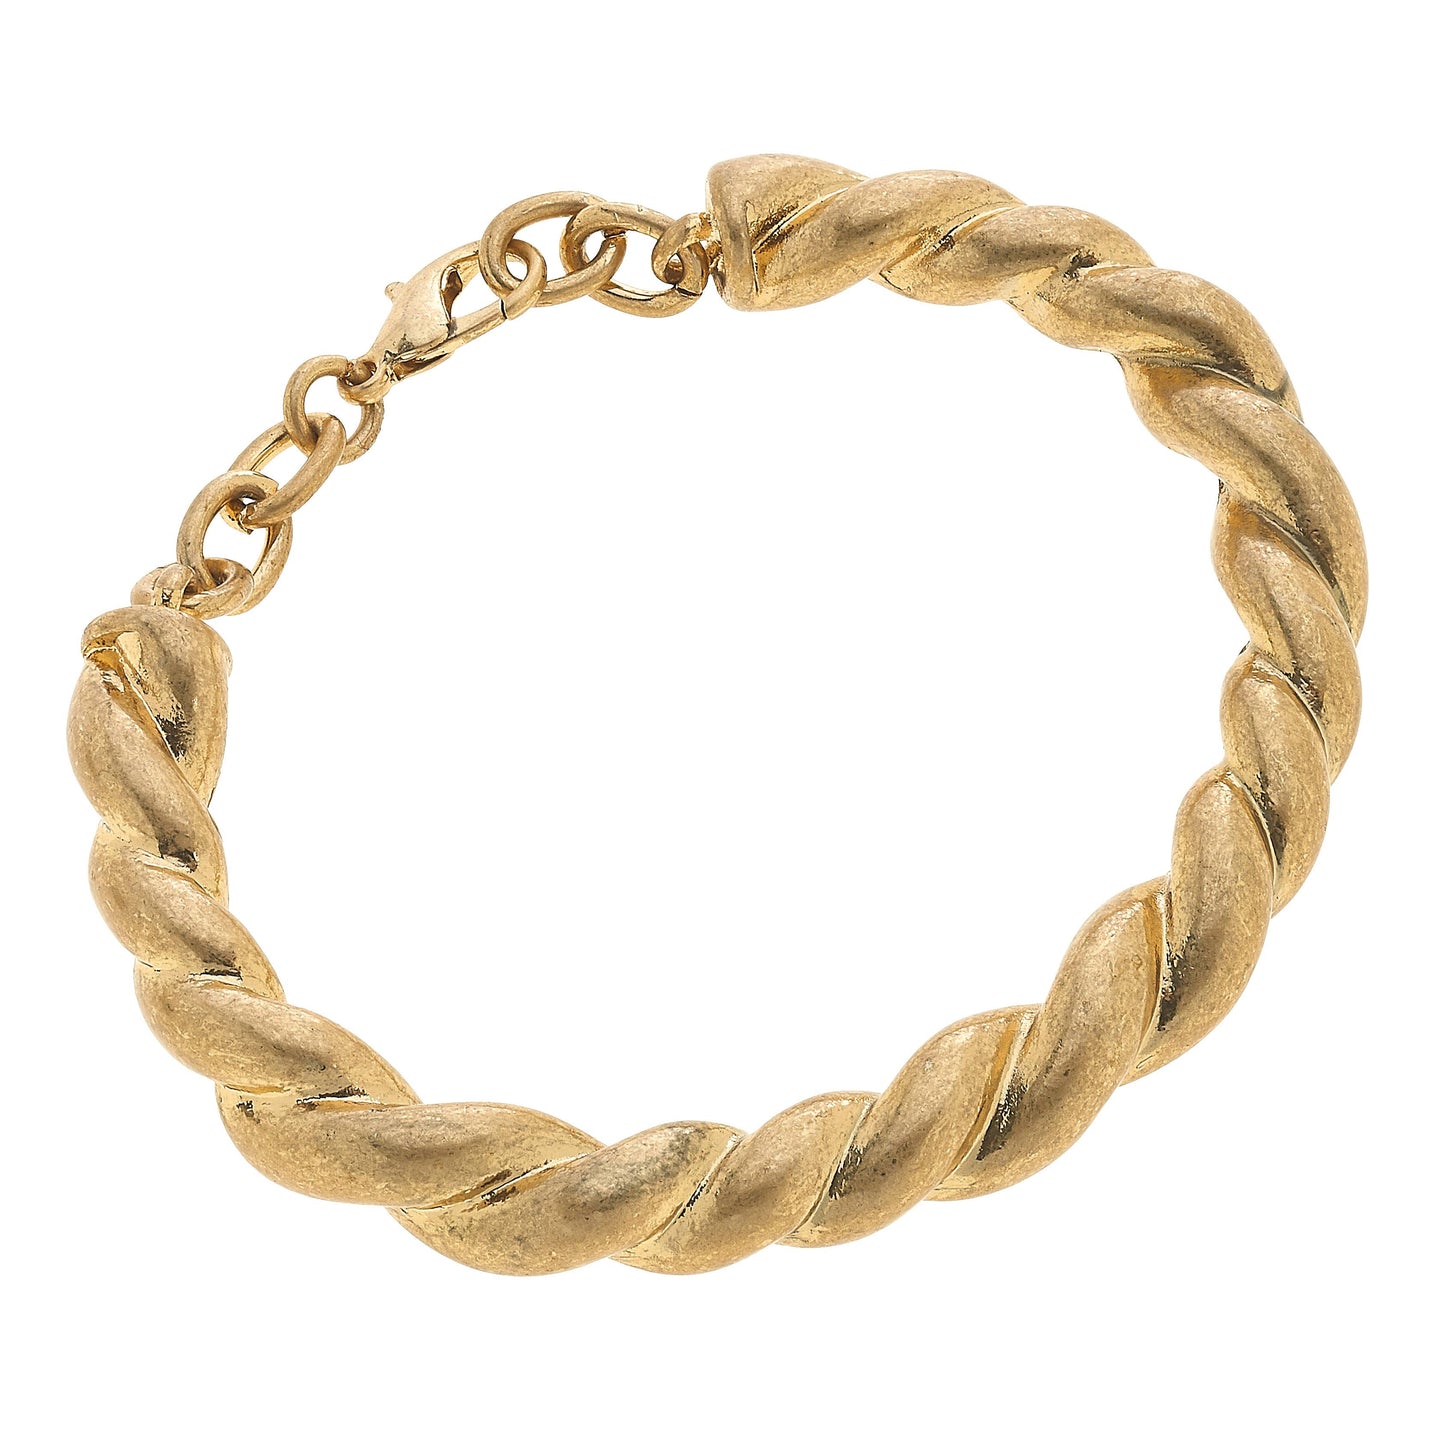 Noemi Frozen Twisted Chain Bangle in Worn Gold